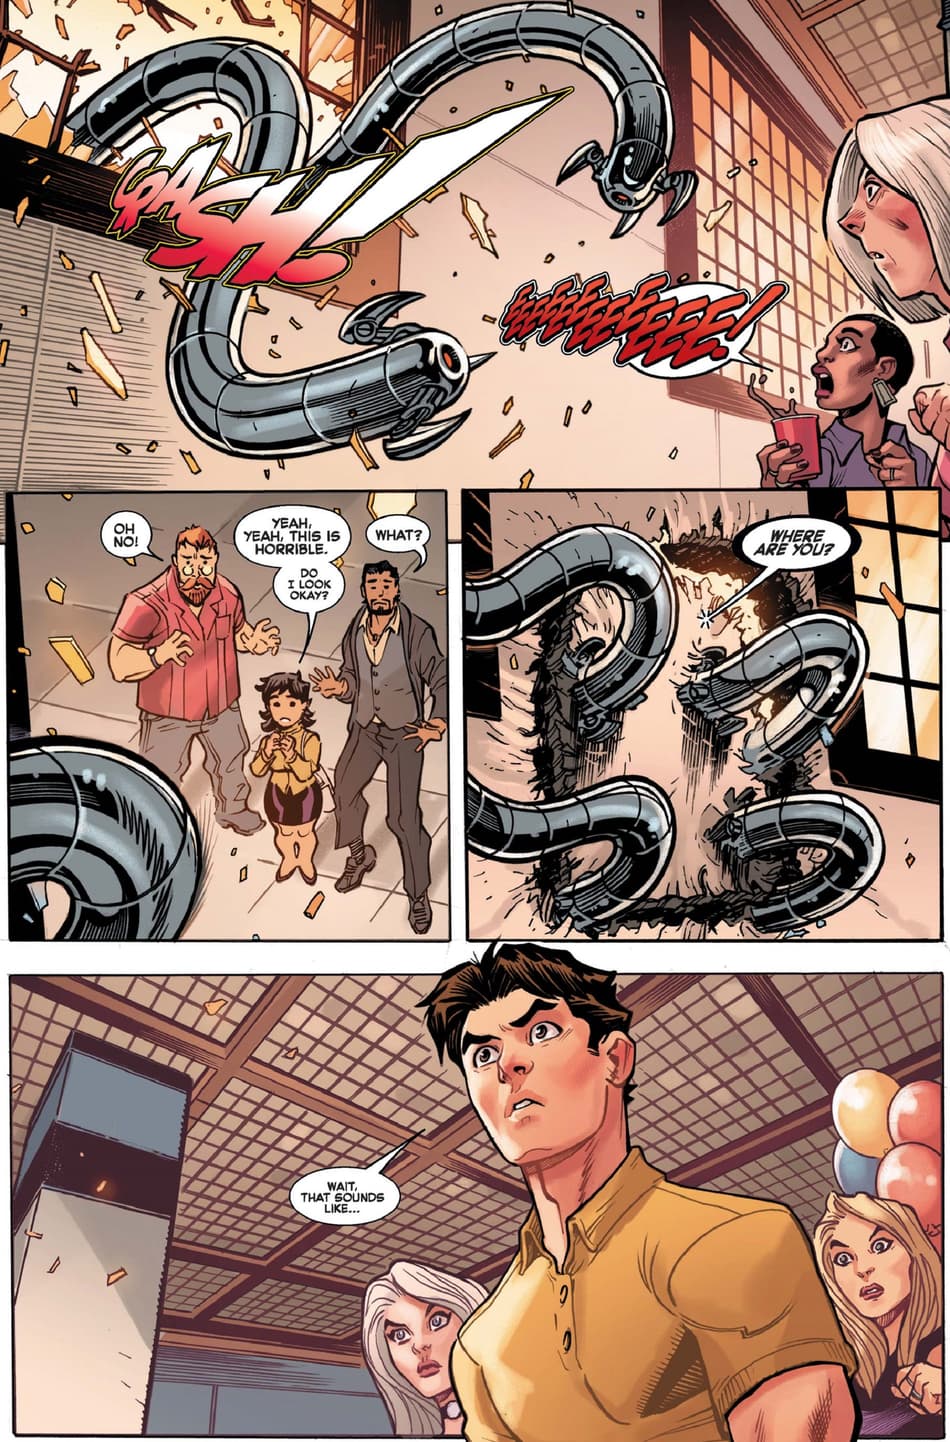 Peter ruins a surprise in THE AMAZING SPIDER-MAN (2022) #6.